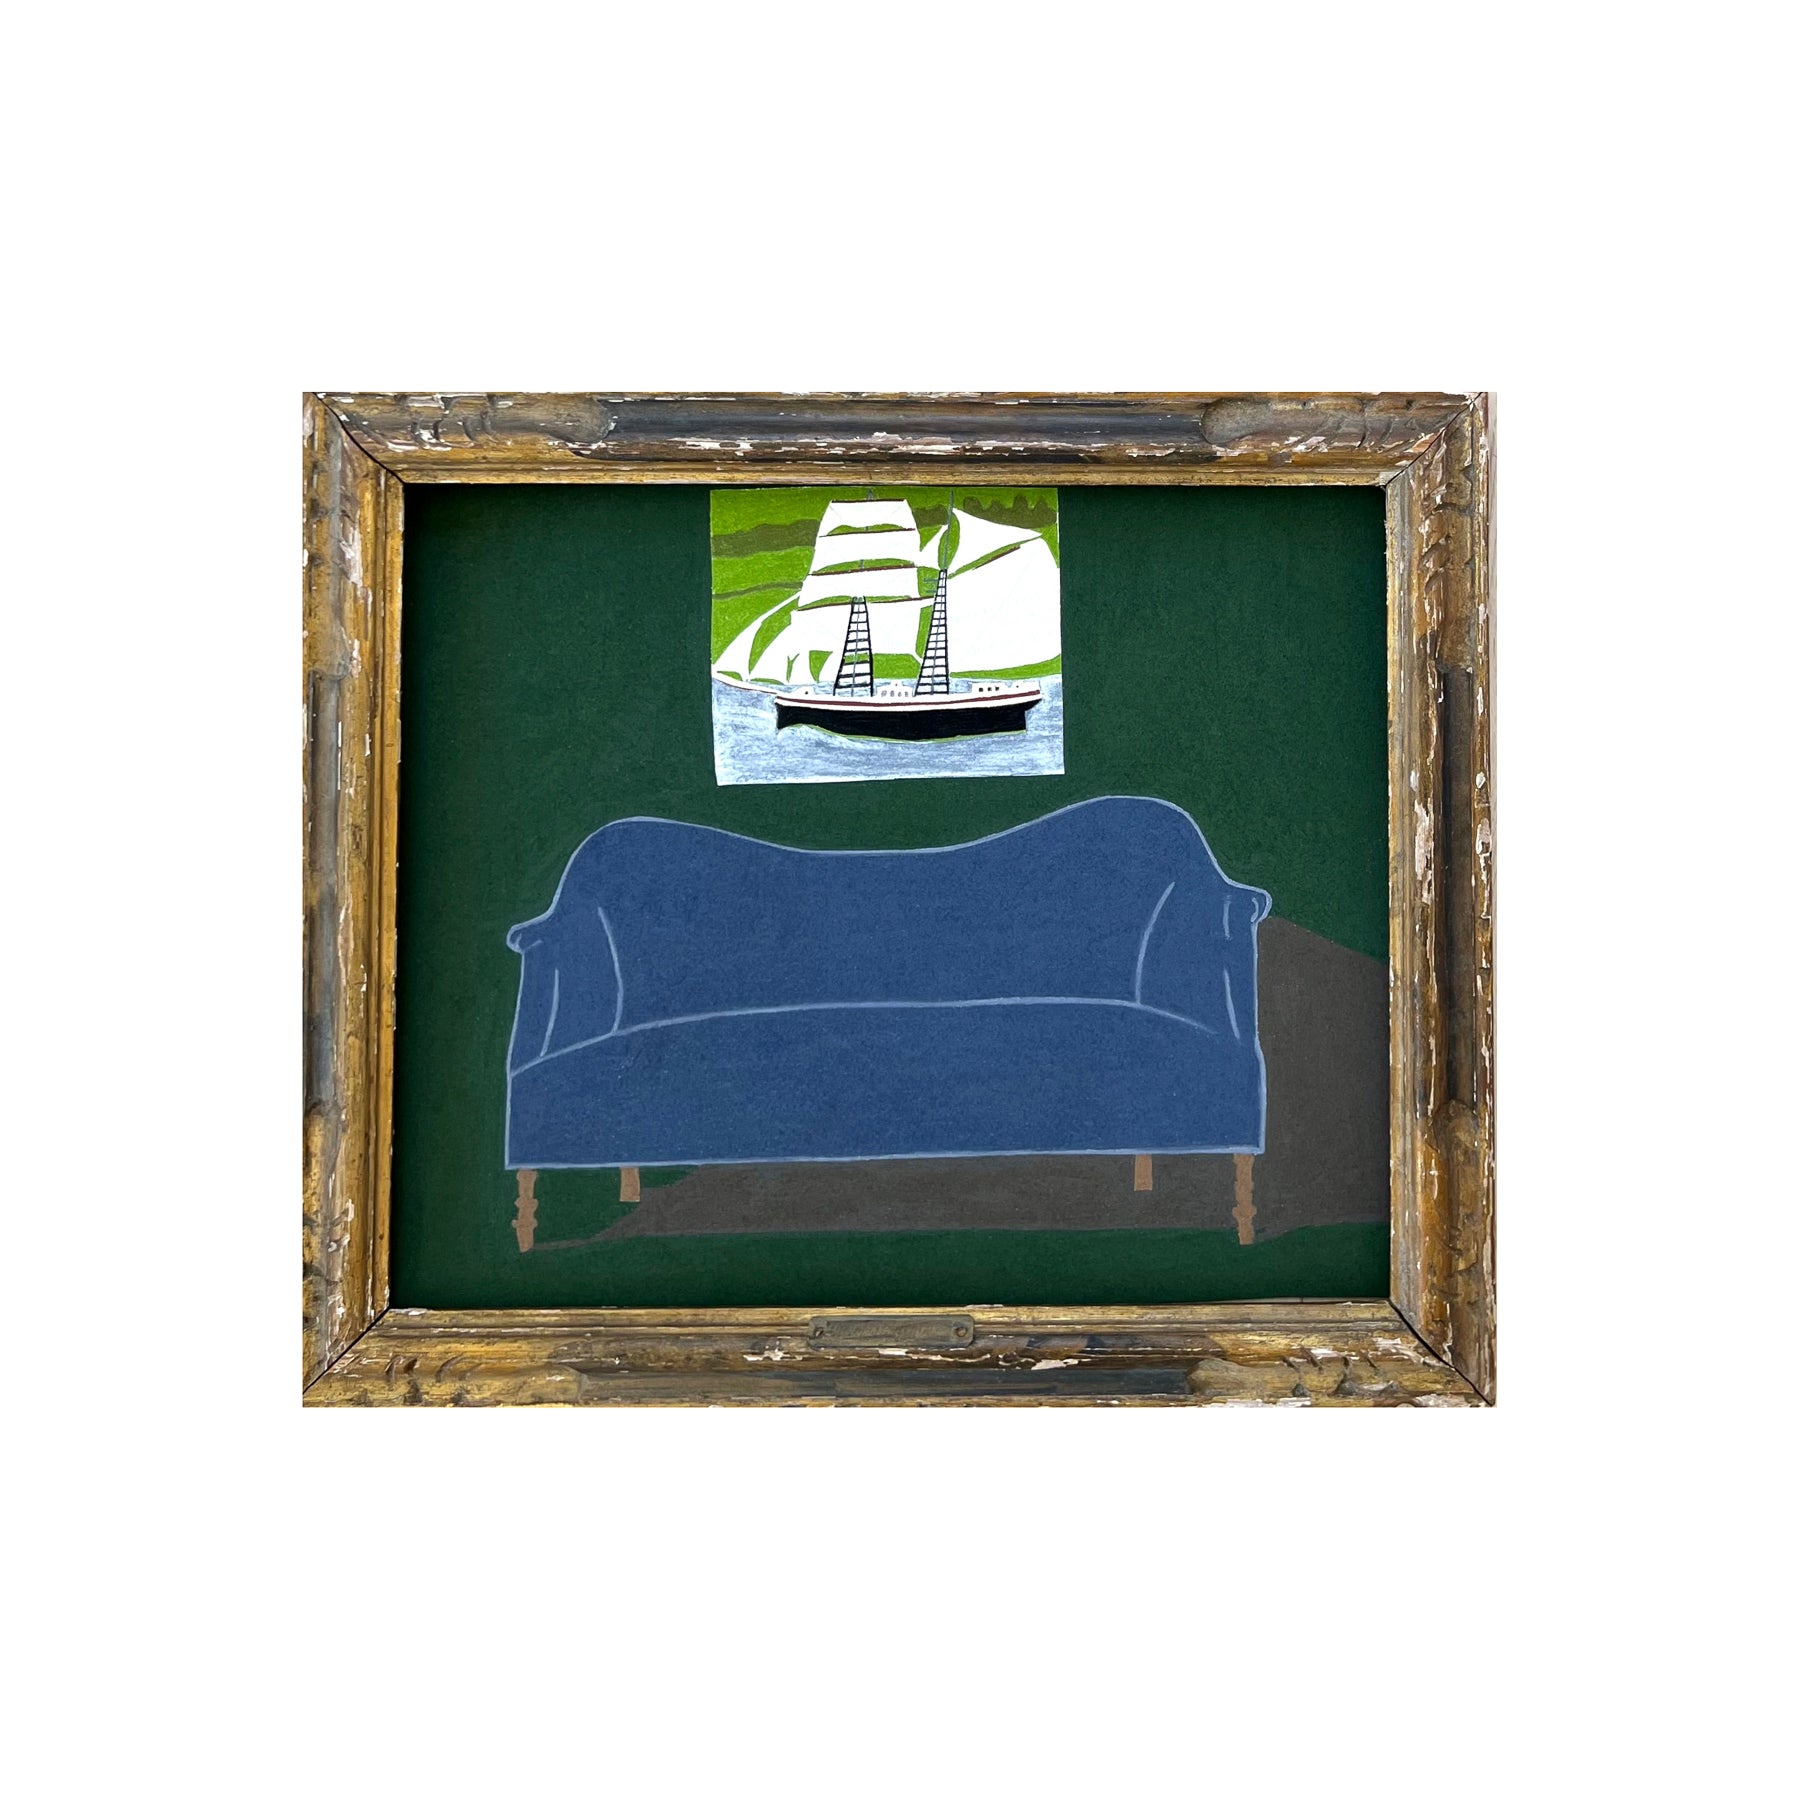 Antique Chaise and Alfred Wallis by Theresa Drapkin